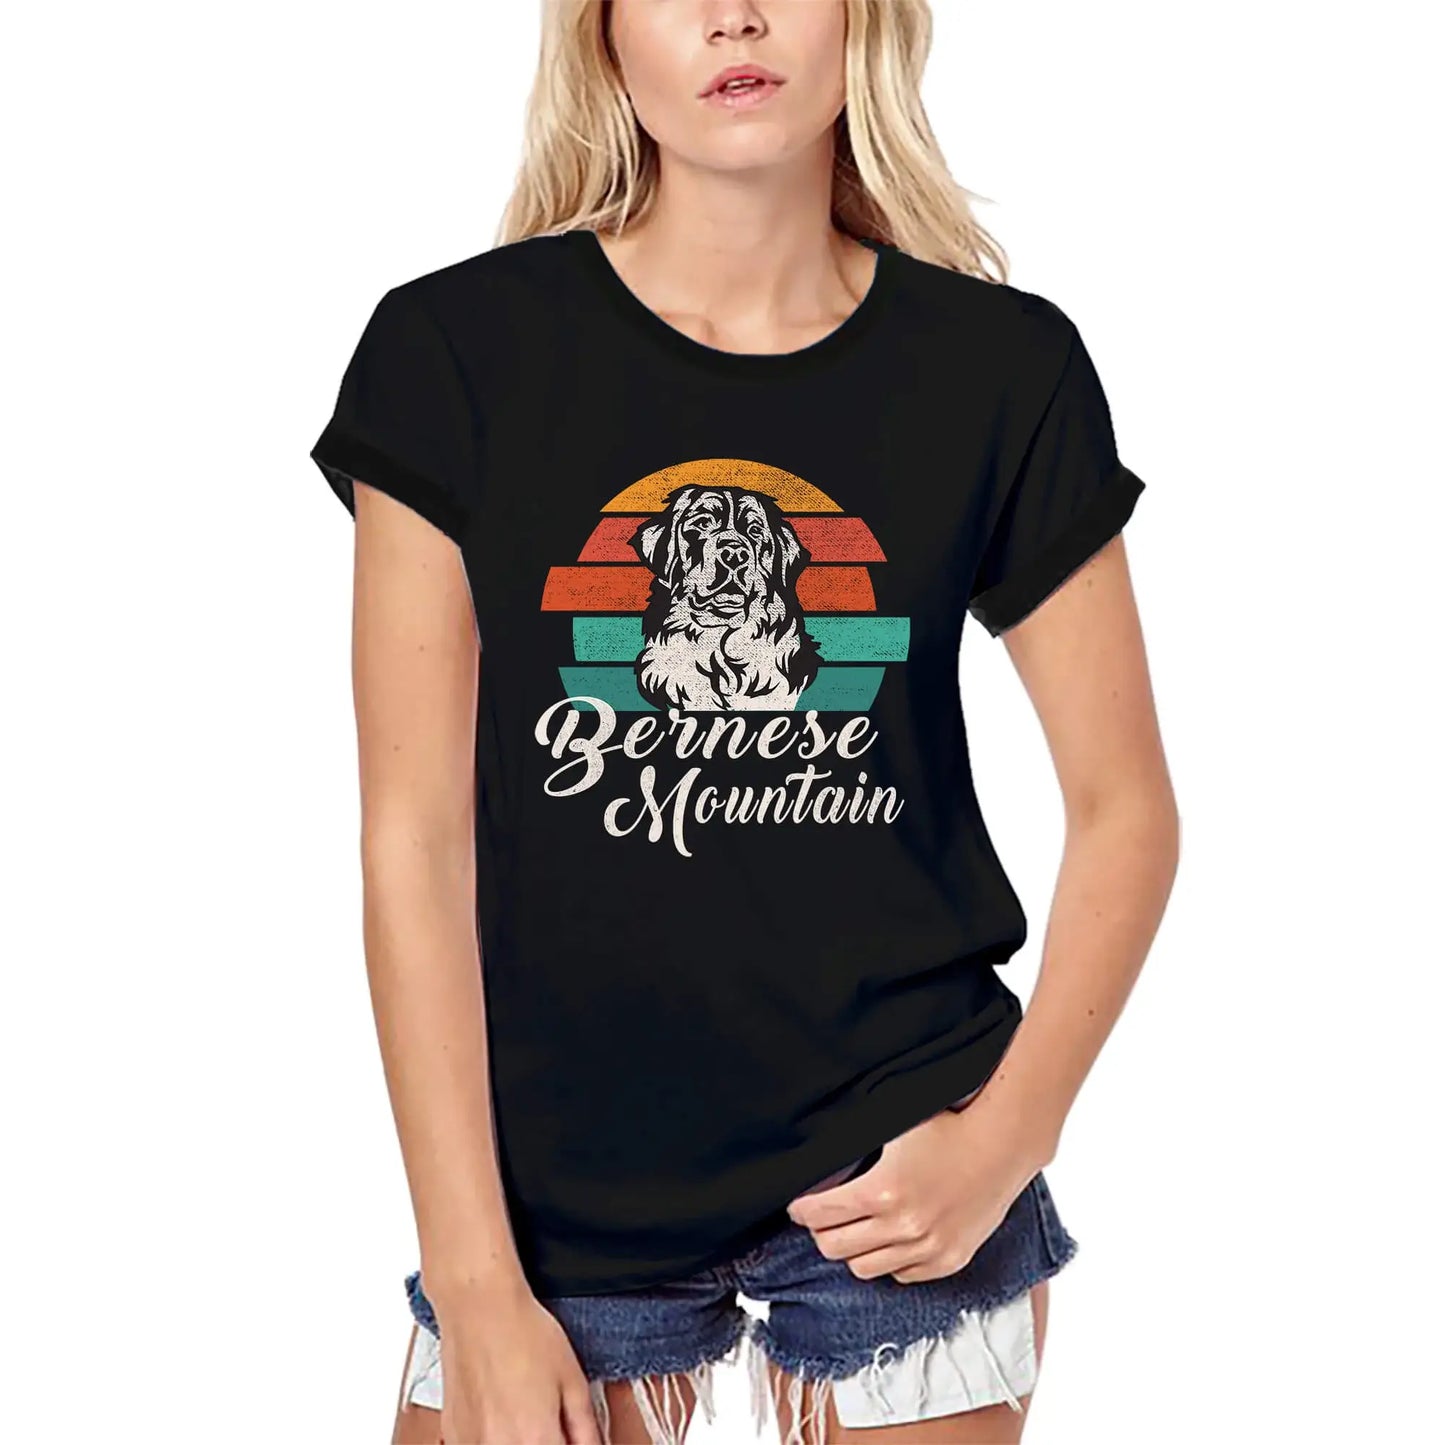 Women's Graphic T-Shirt Organic Bernese Mountain Breed Eco-Friendly Ladies Limited Edition Short Sleeve Tee-Shirt Vintage Birthday Gift Novelty